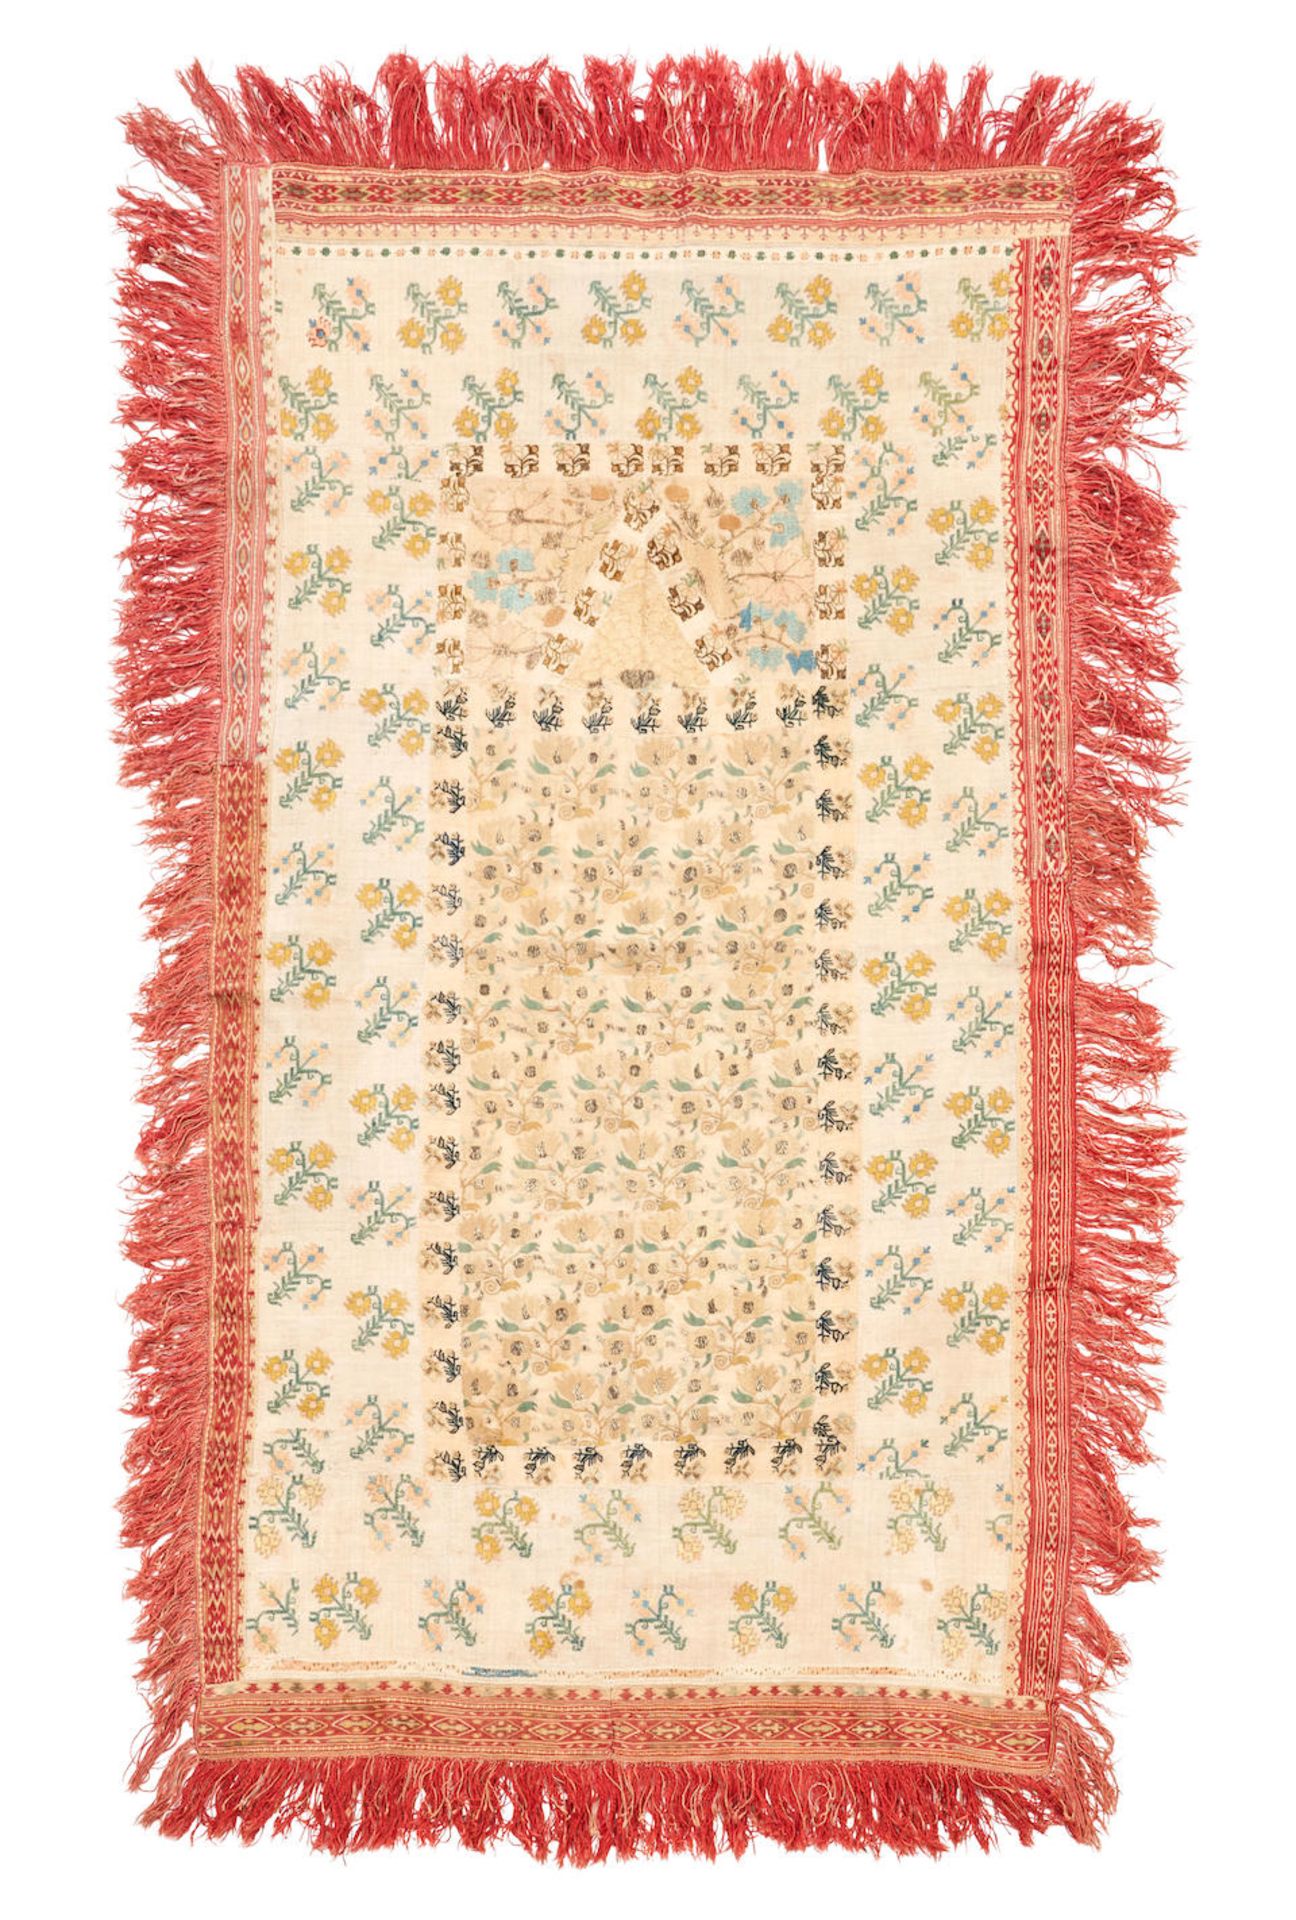 Composite Prayer Hanging Anatolia 54 in. x 31 in.